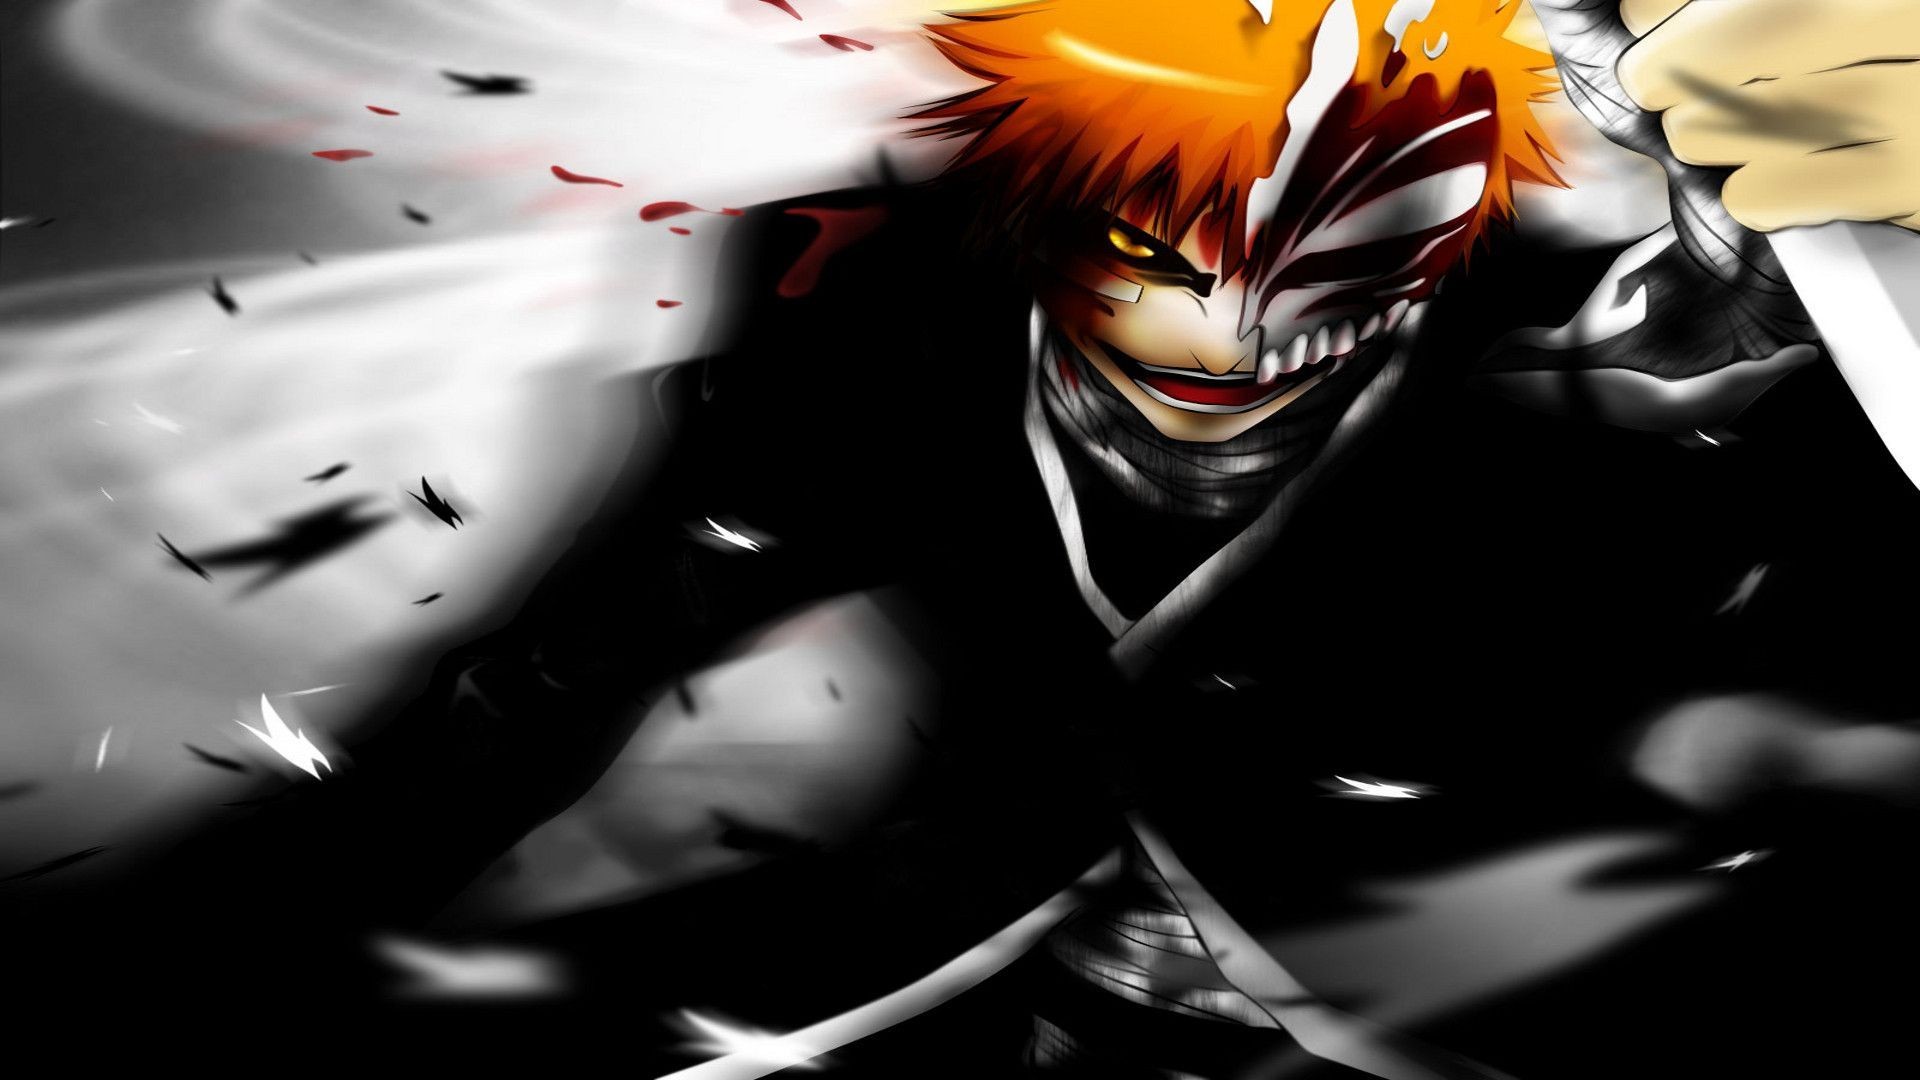 1920x1080 Bleach Anime Wallpapers HD Wallpapers - HD Wallpapers